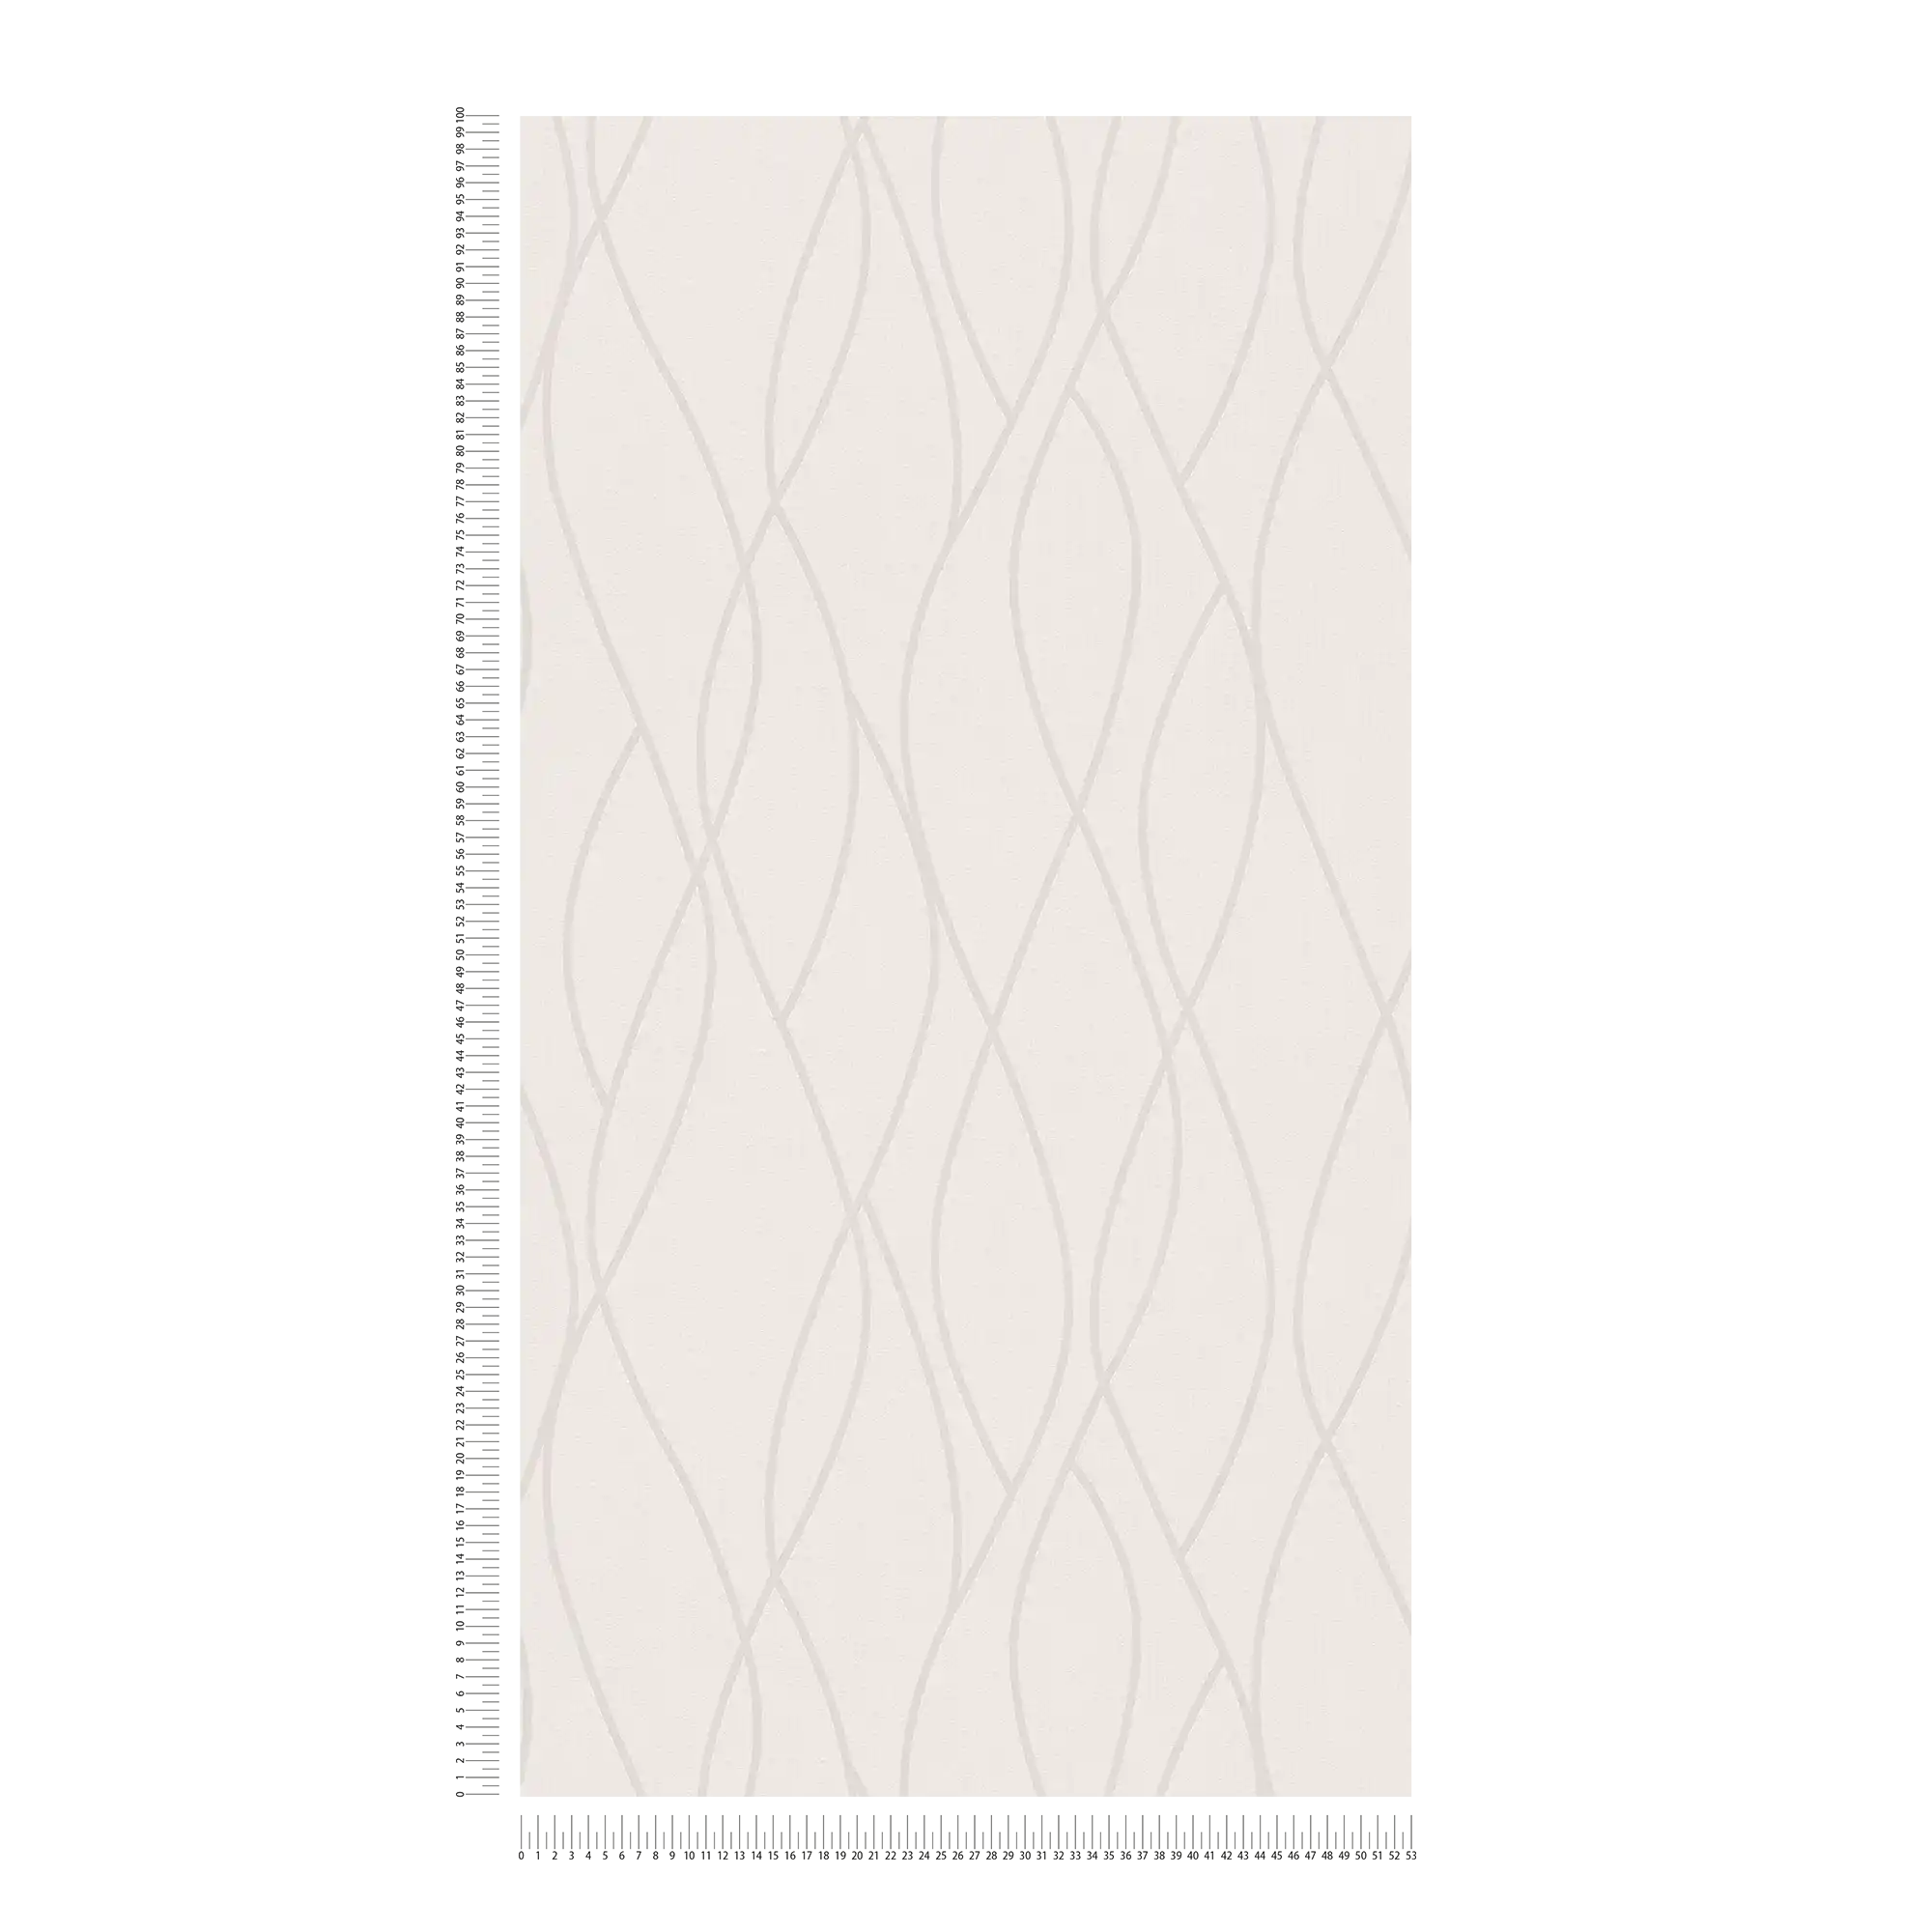             Plain wallpaper with graphic line pattern - white
        